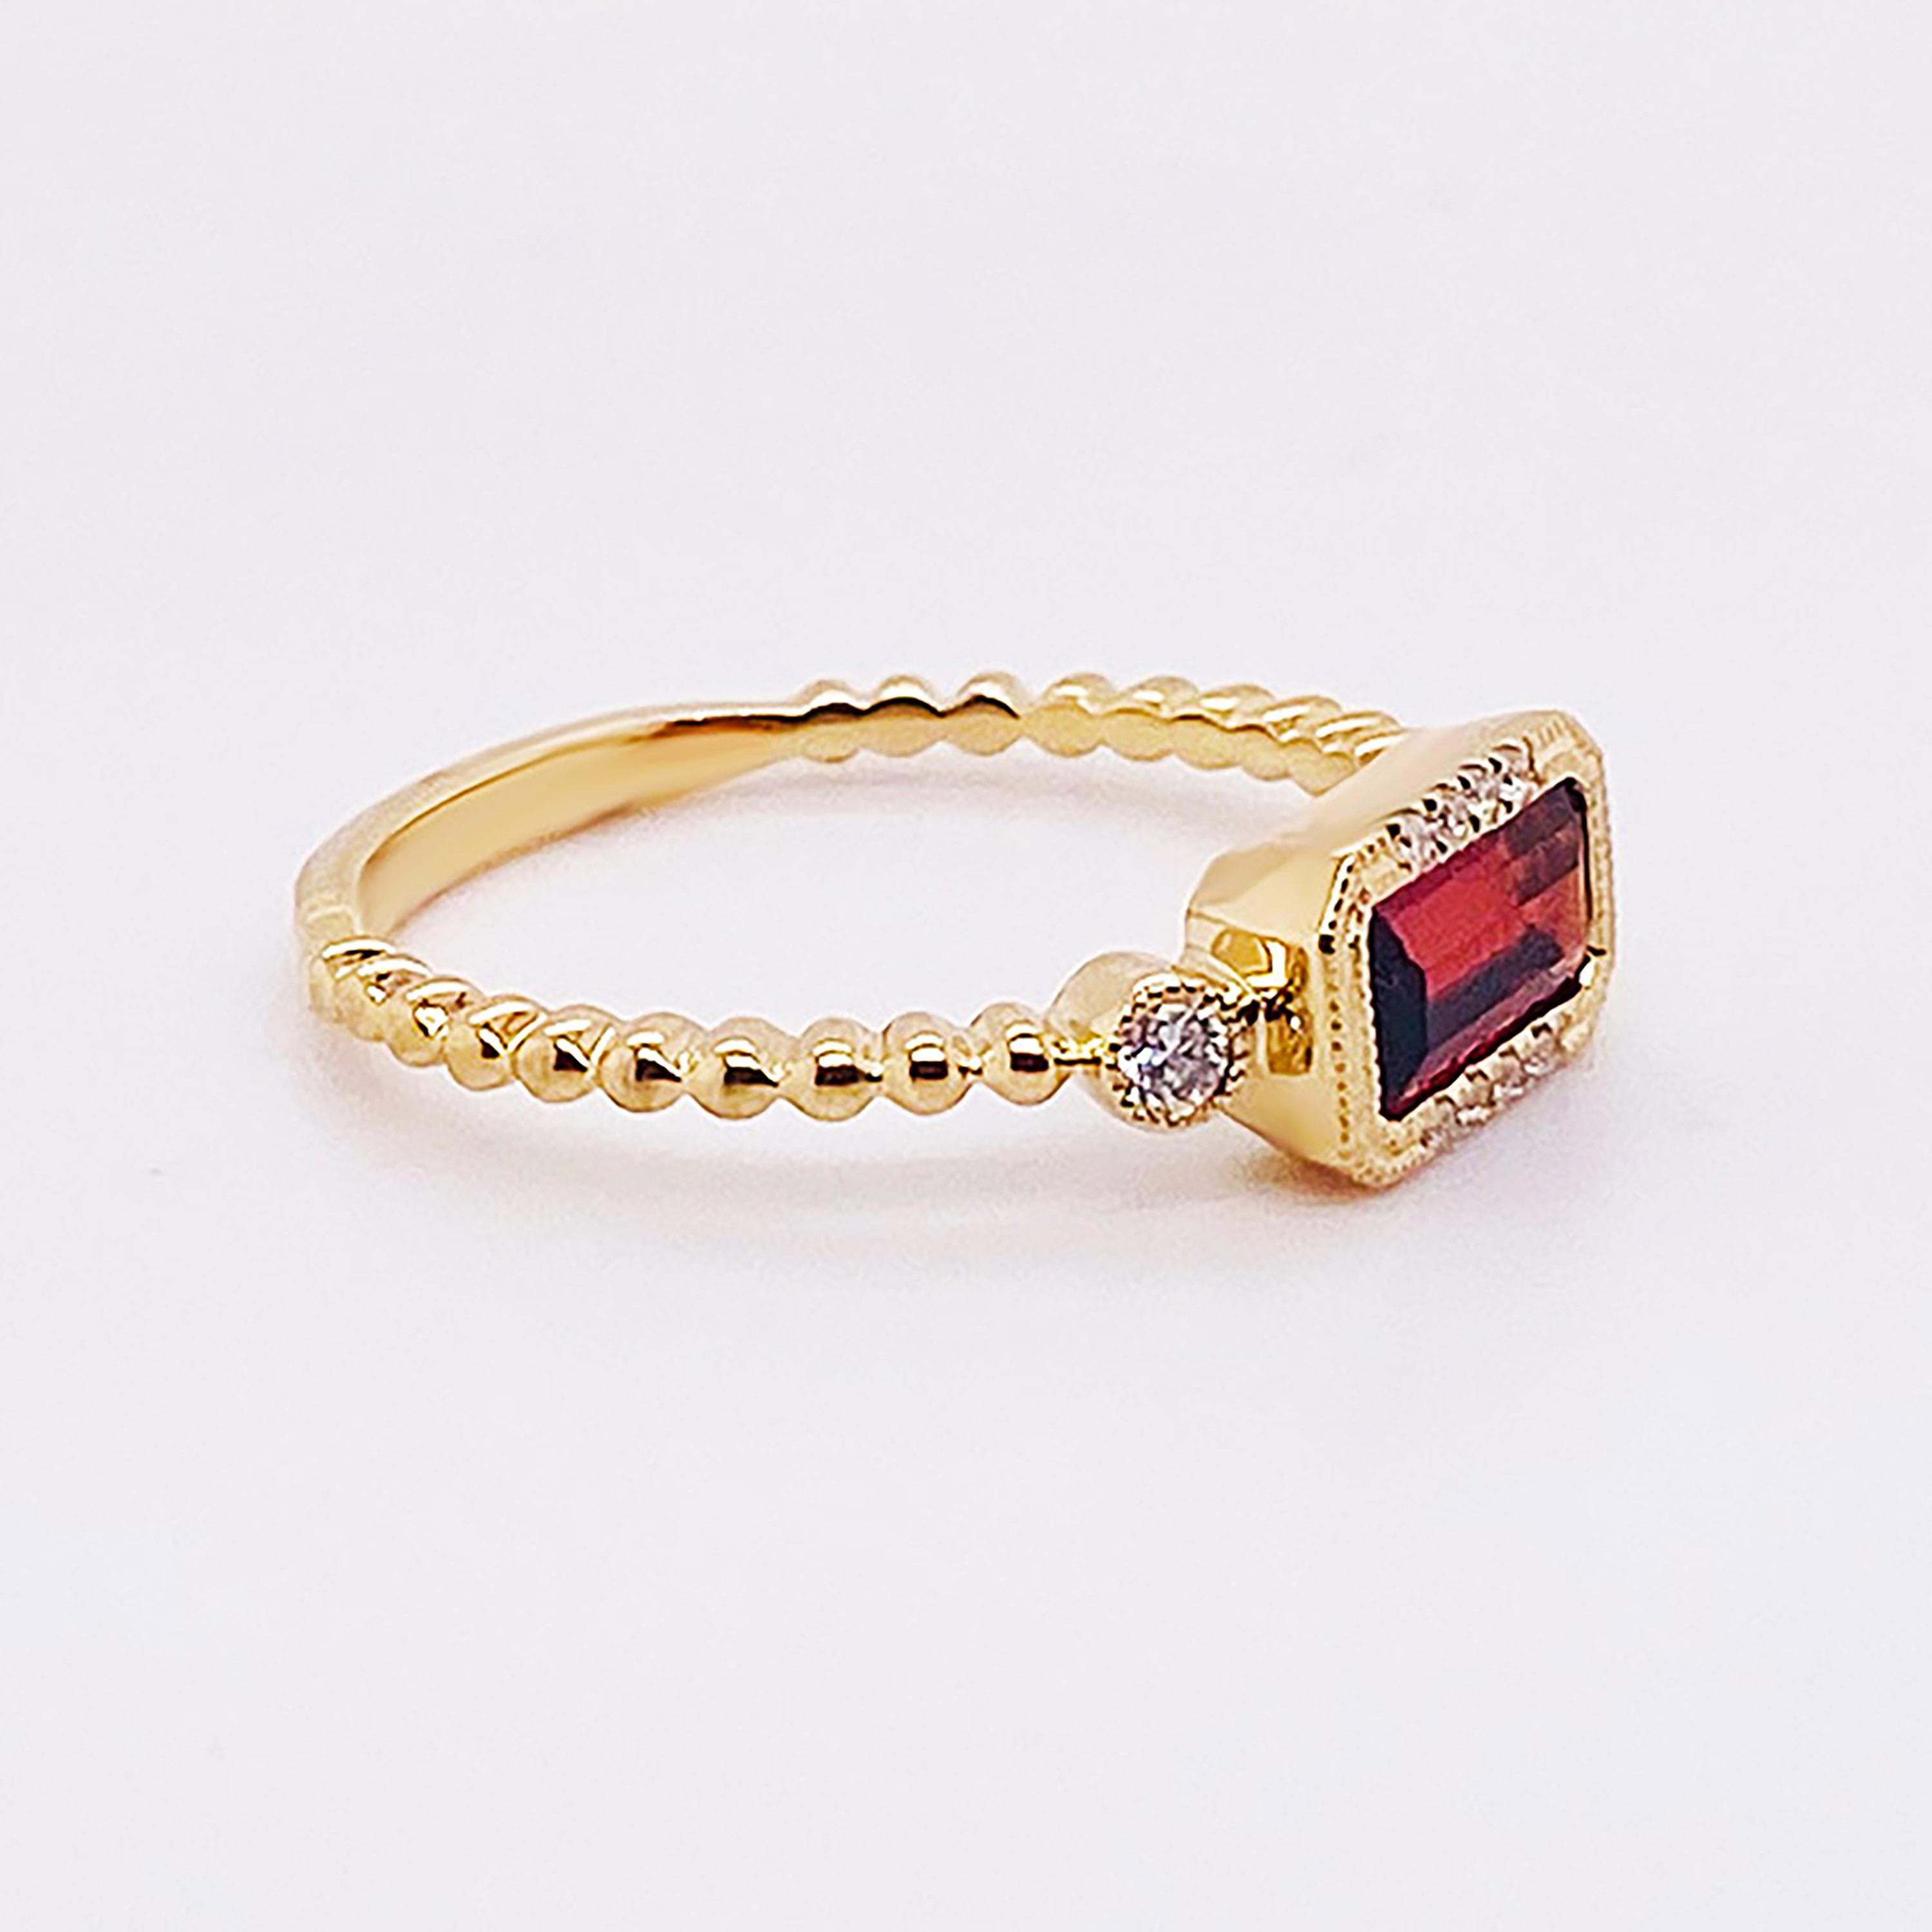 For Sale:  Garnet Diamond Ring January East to West 14K Gold Yellow Gold 5